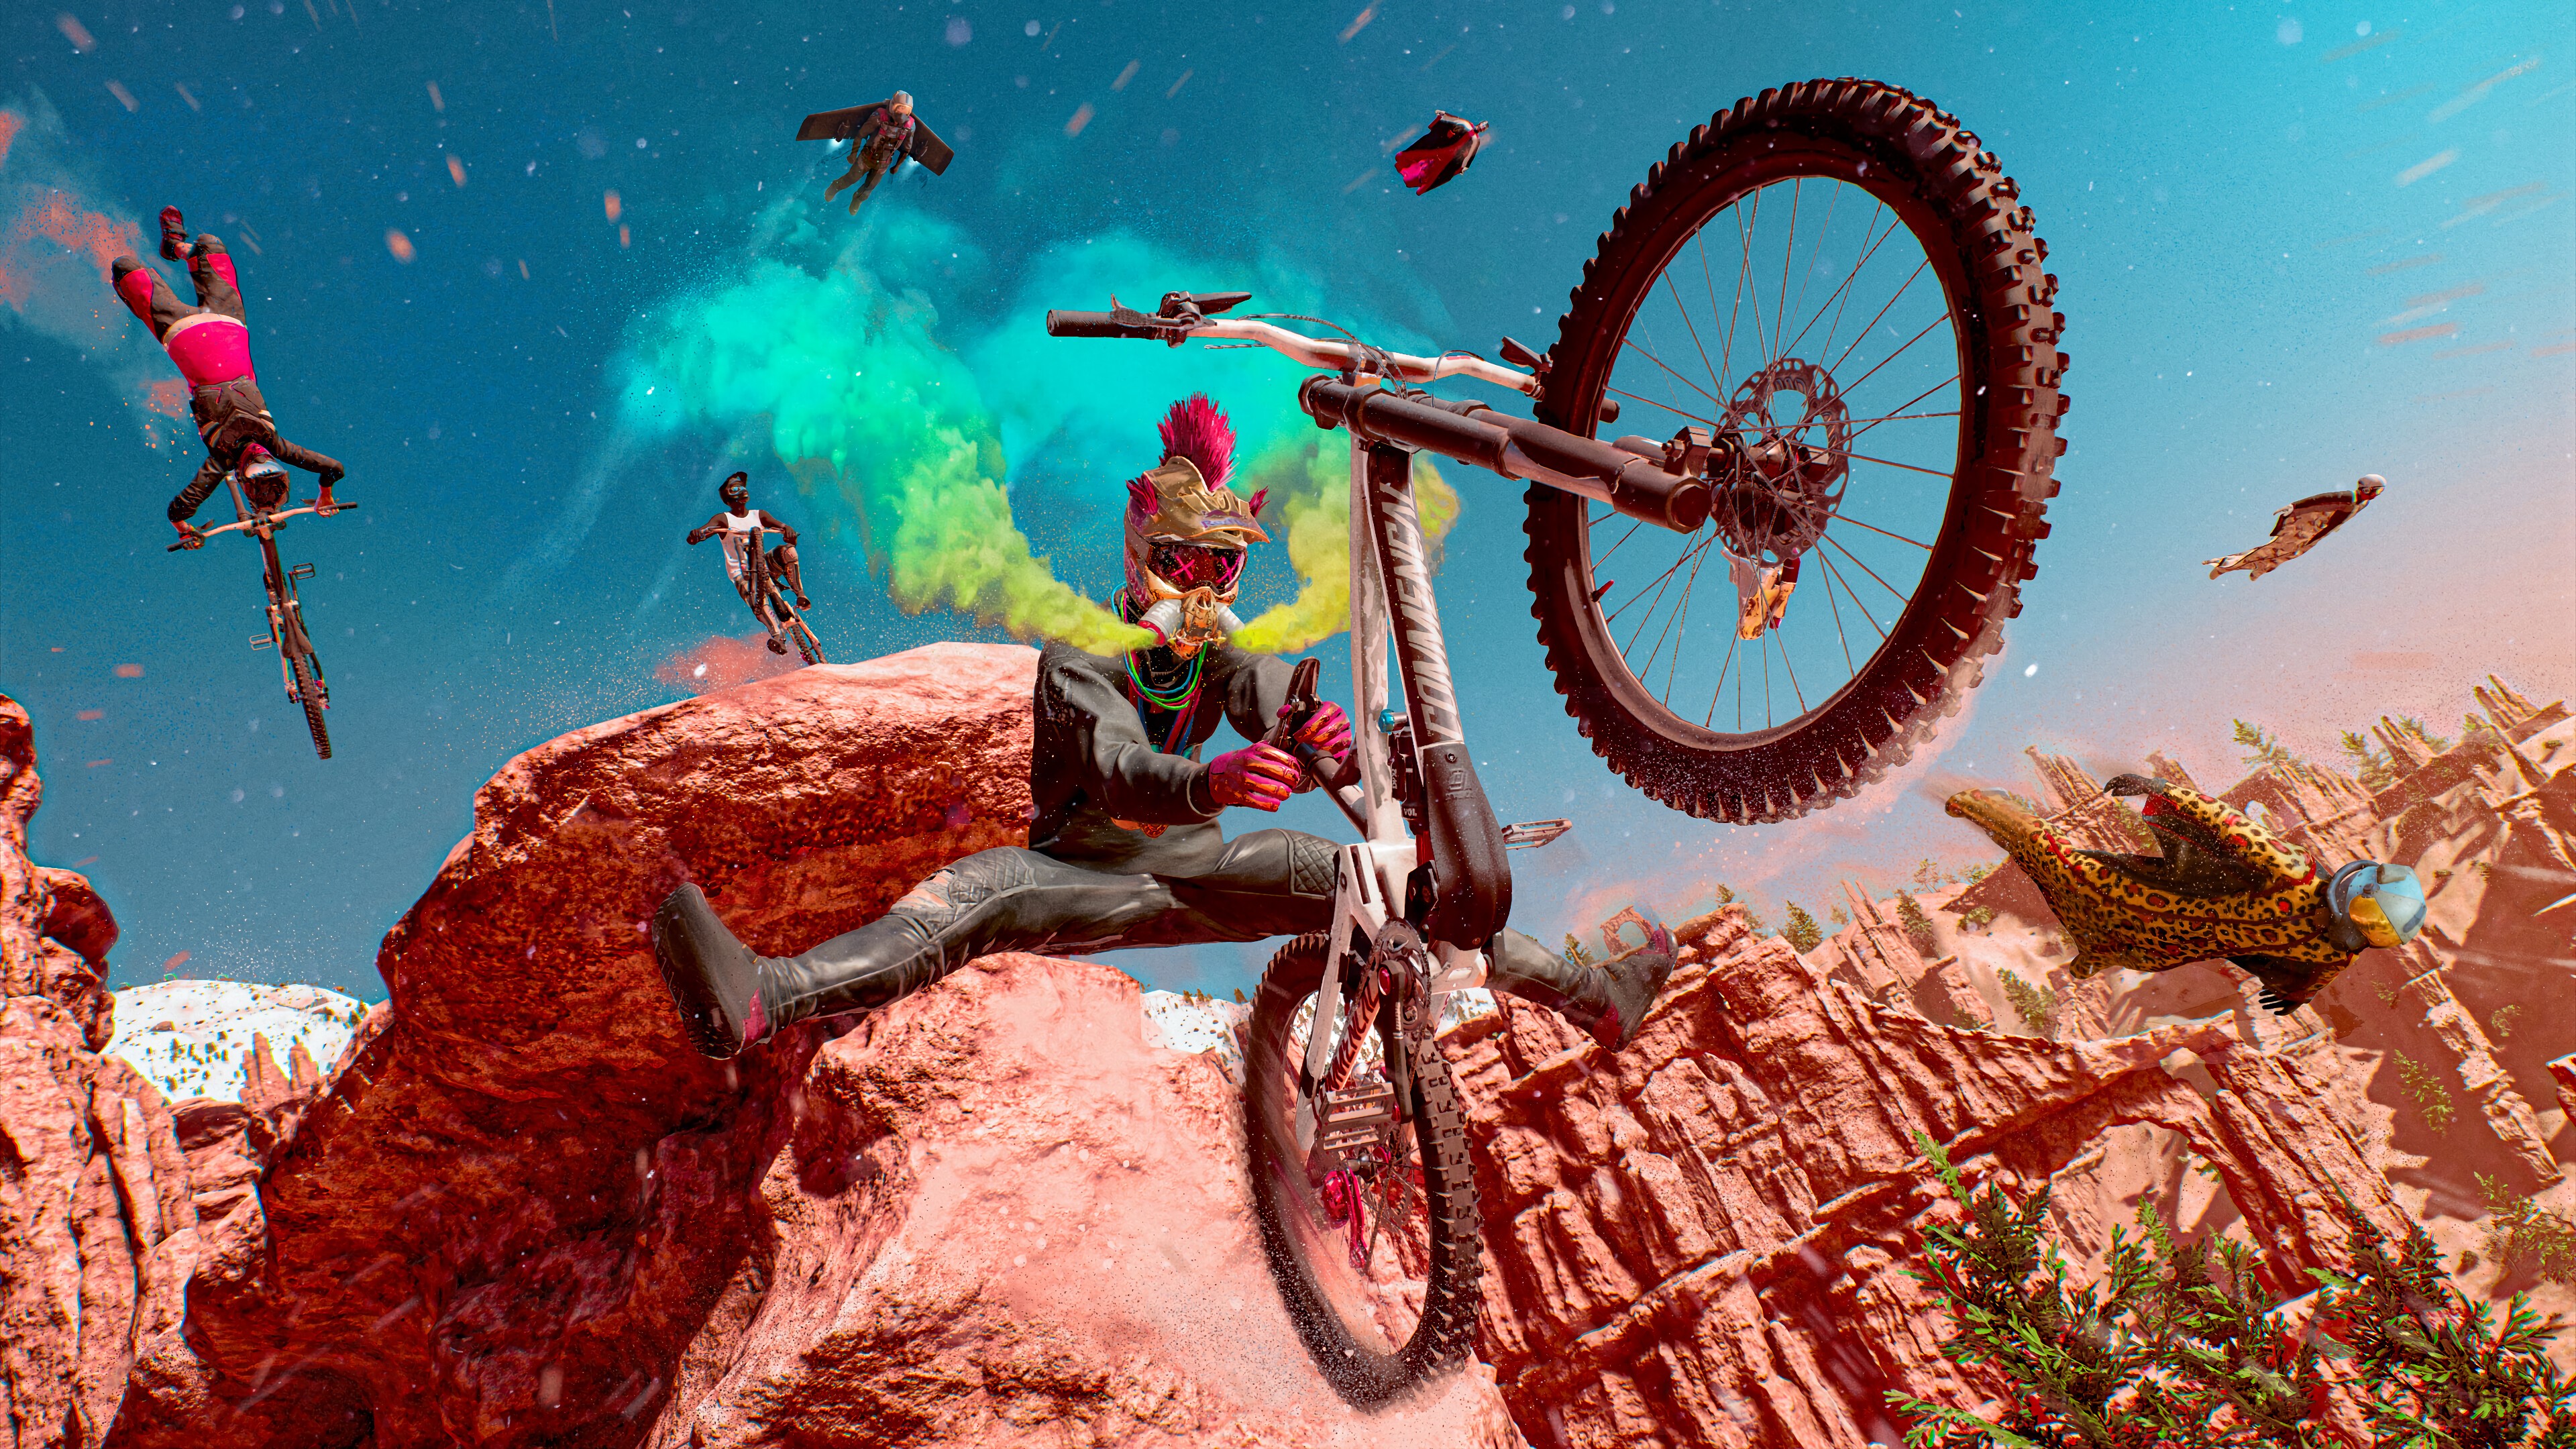 Riders Republic, Extreme Sports, Video Game, BMX, Mountain Bike, Bicycle, Wingsuit 4k Gallery HD Wallpaper